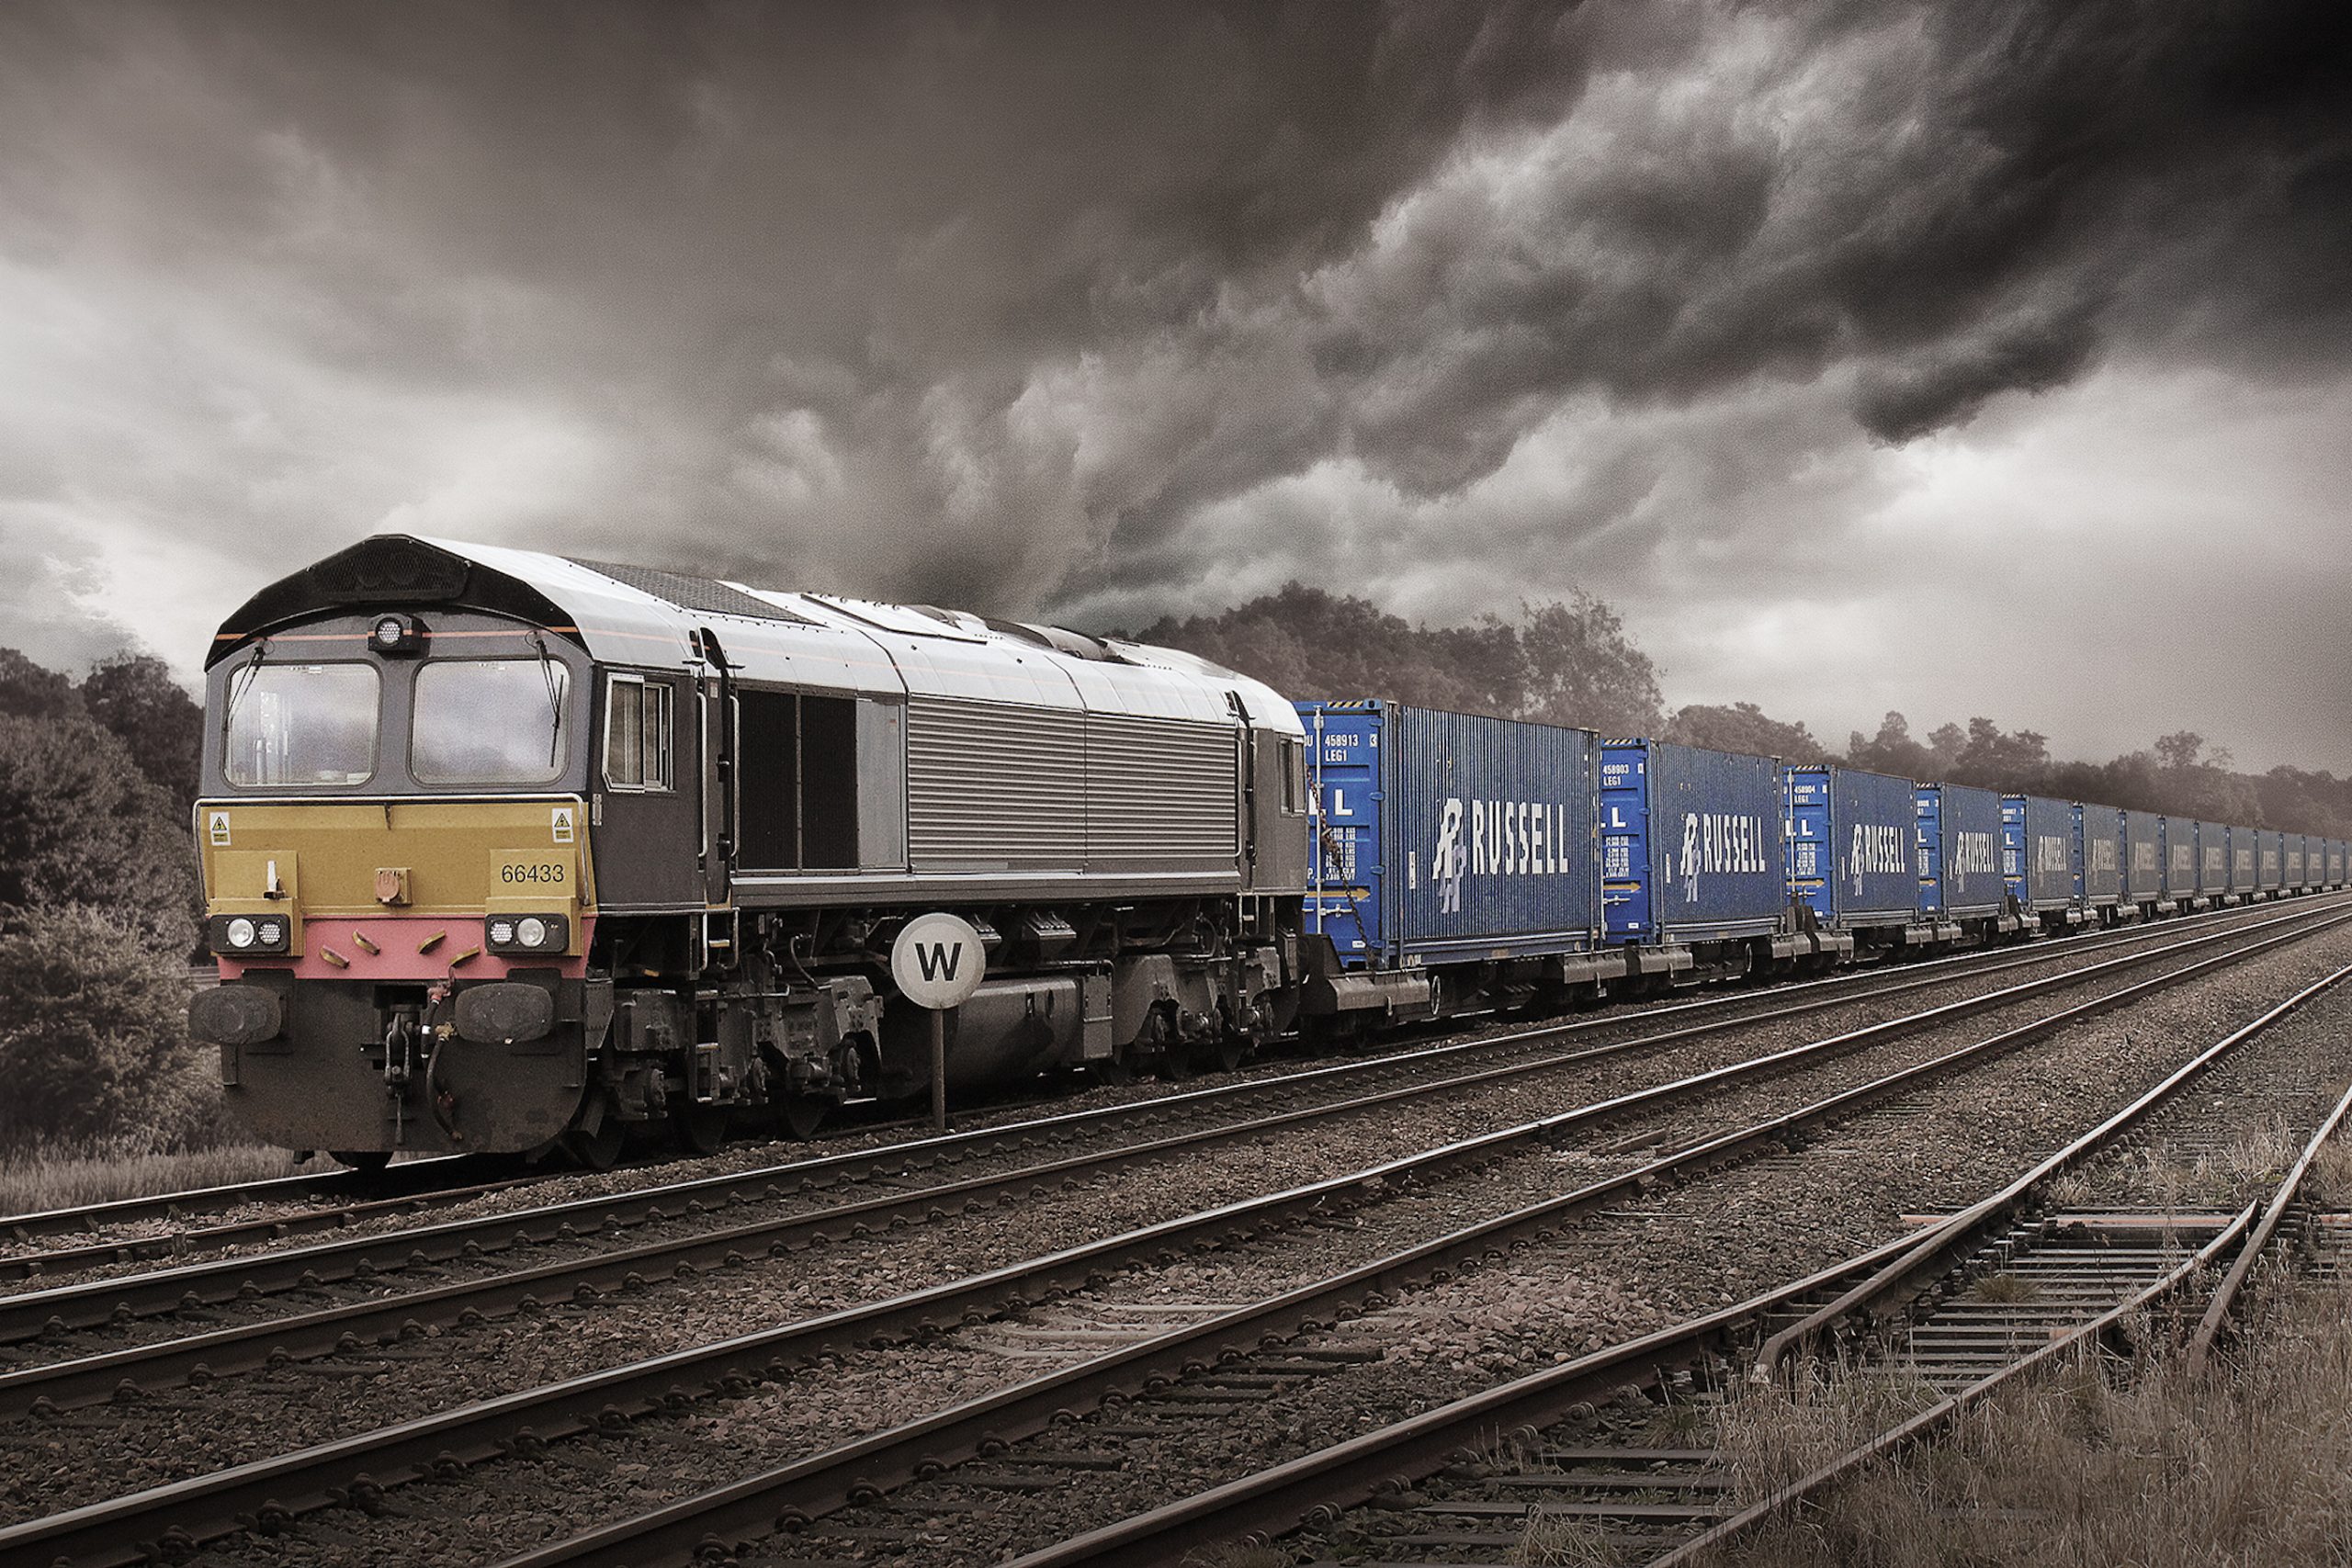 Class 66 locomotive hauling a train of Russell containers under a leaden sky